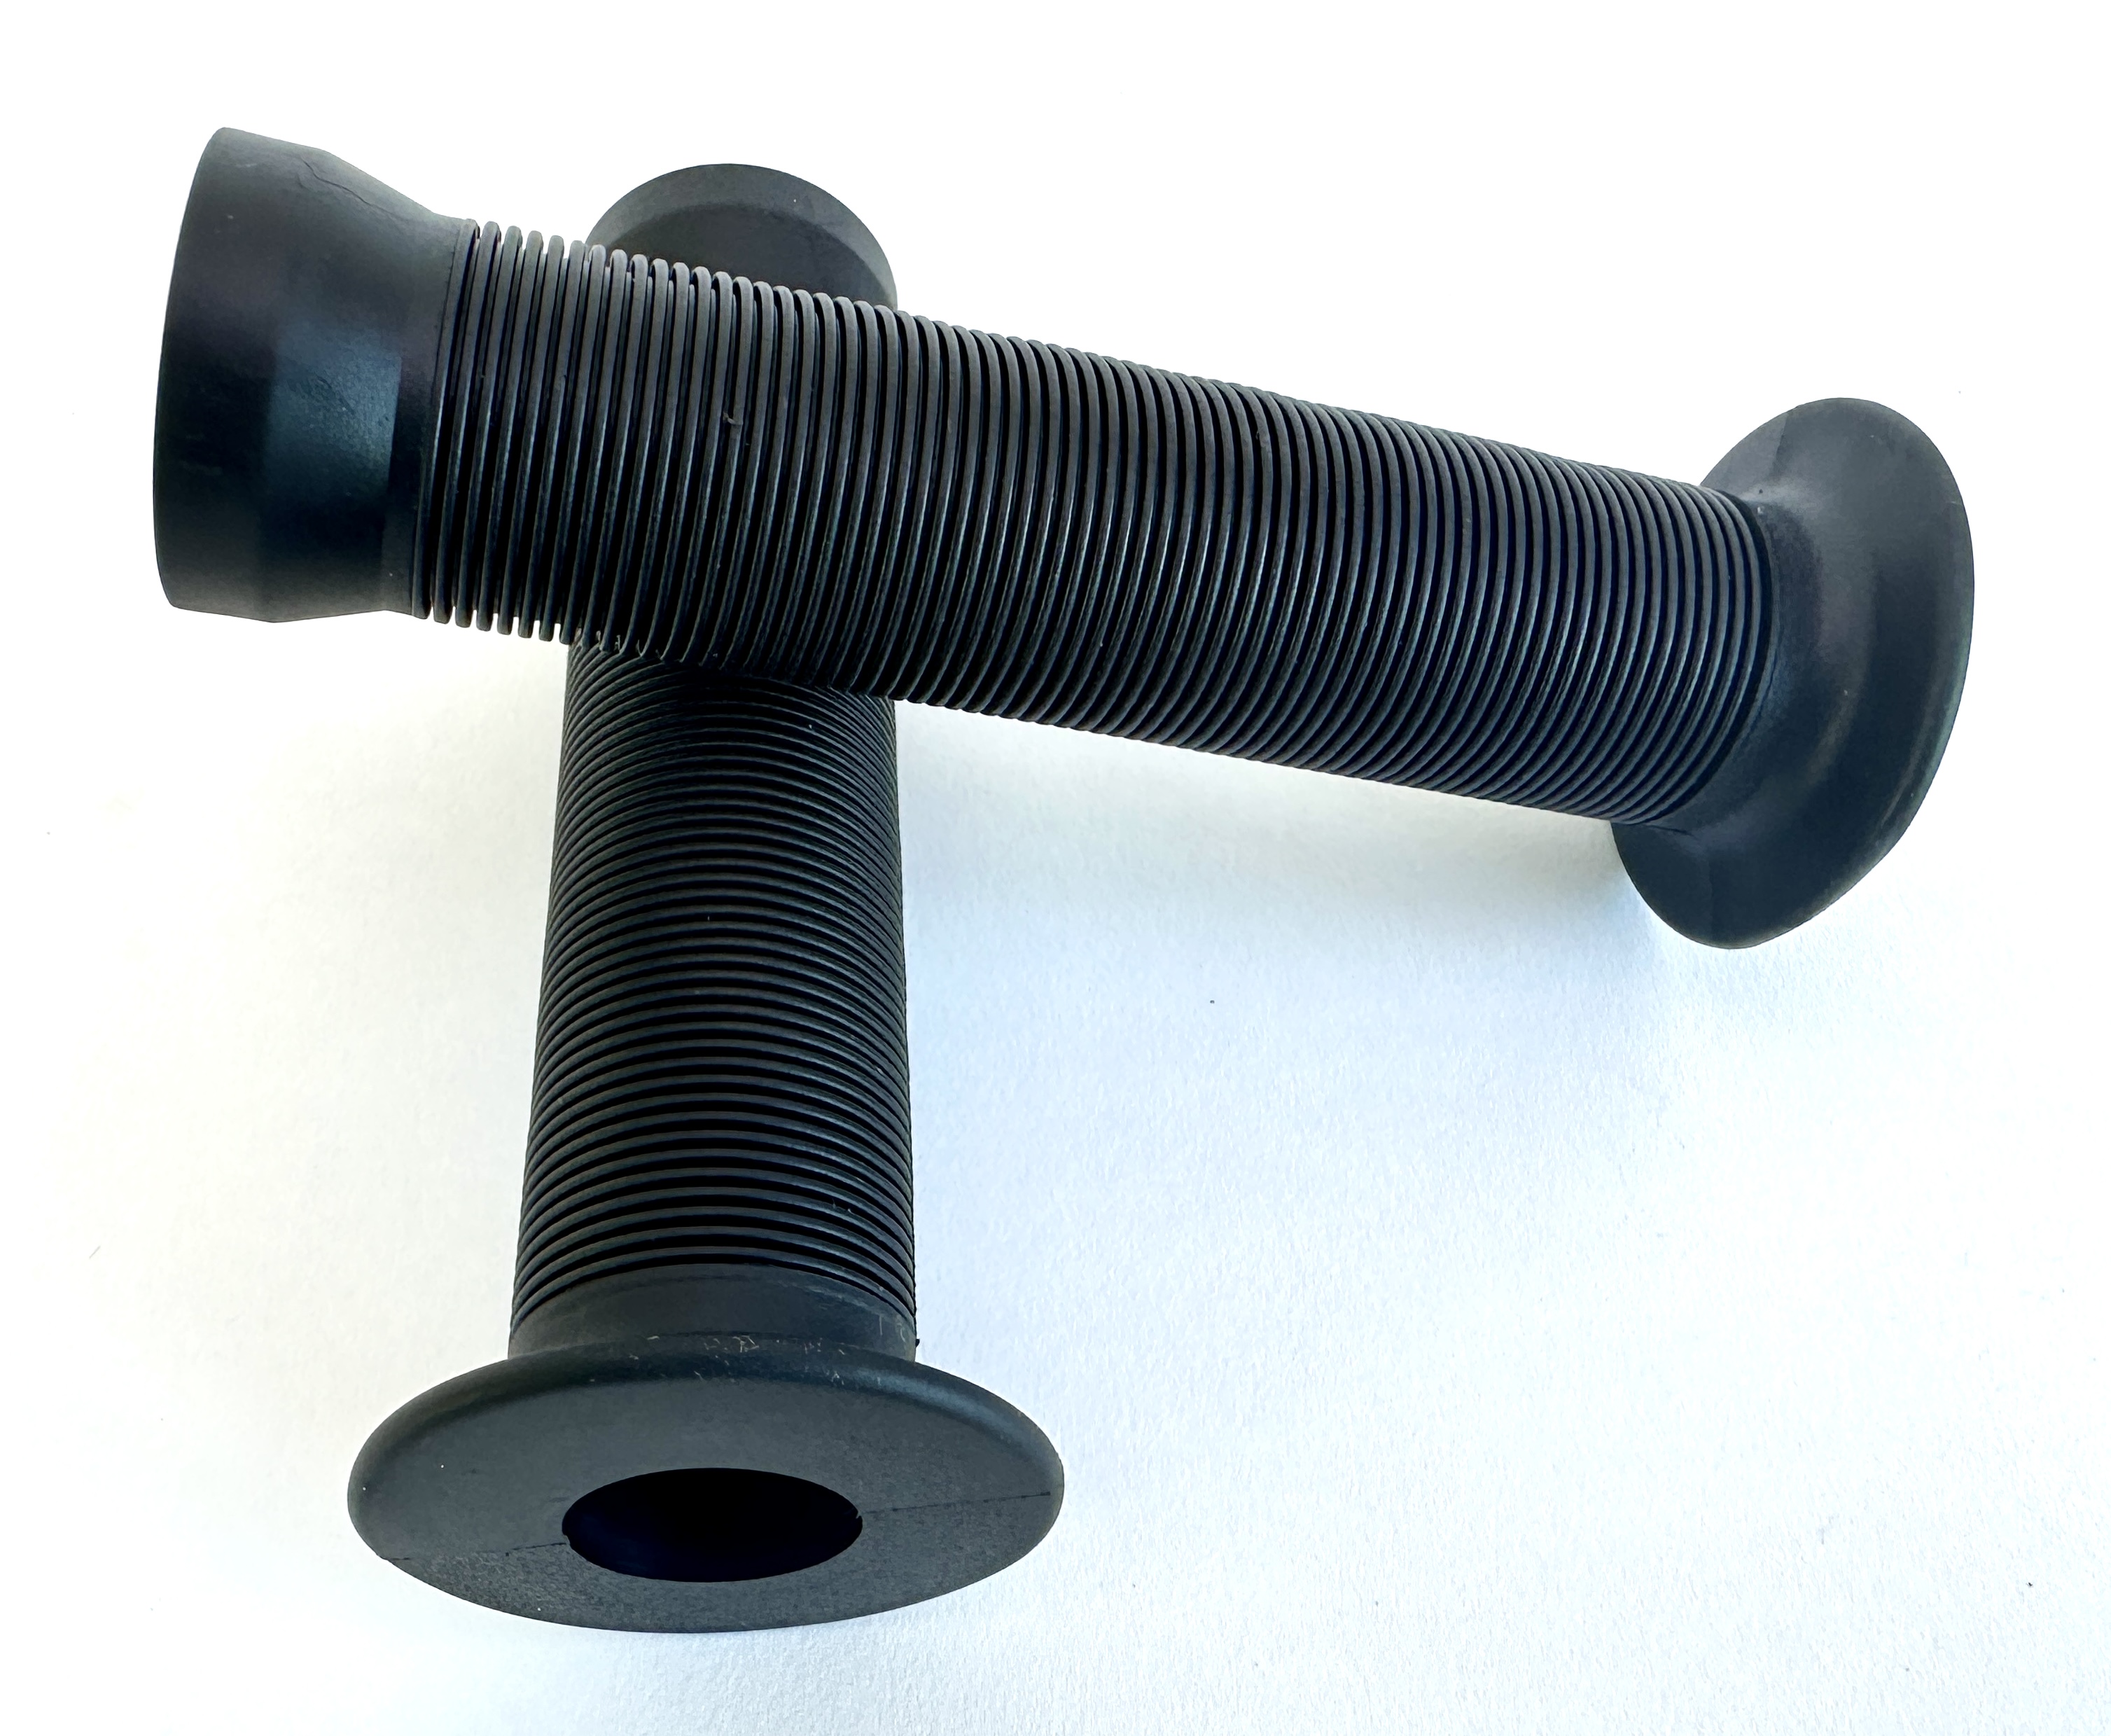 UD Grips for handlebar made of rubber, black